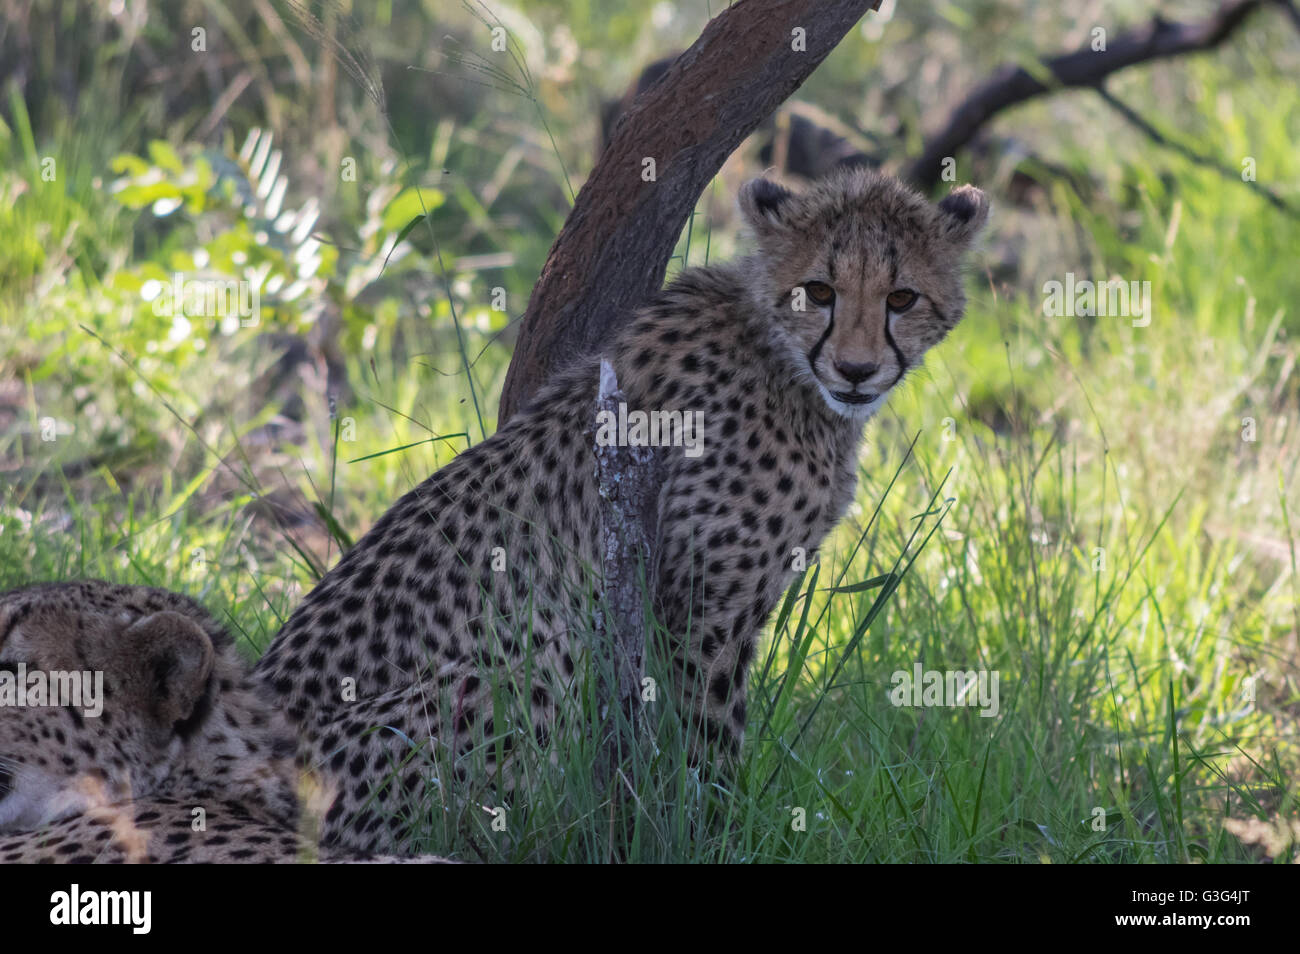 South African Cheetah varia in tutto il Welgevonden Game Reserve in Sud Africa Foto Stock